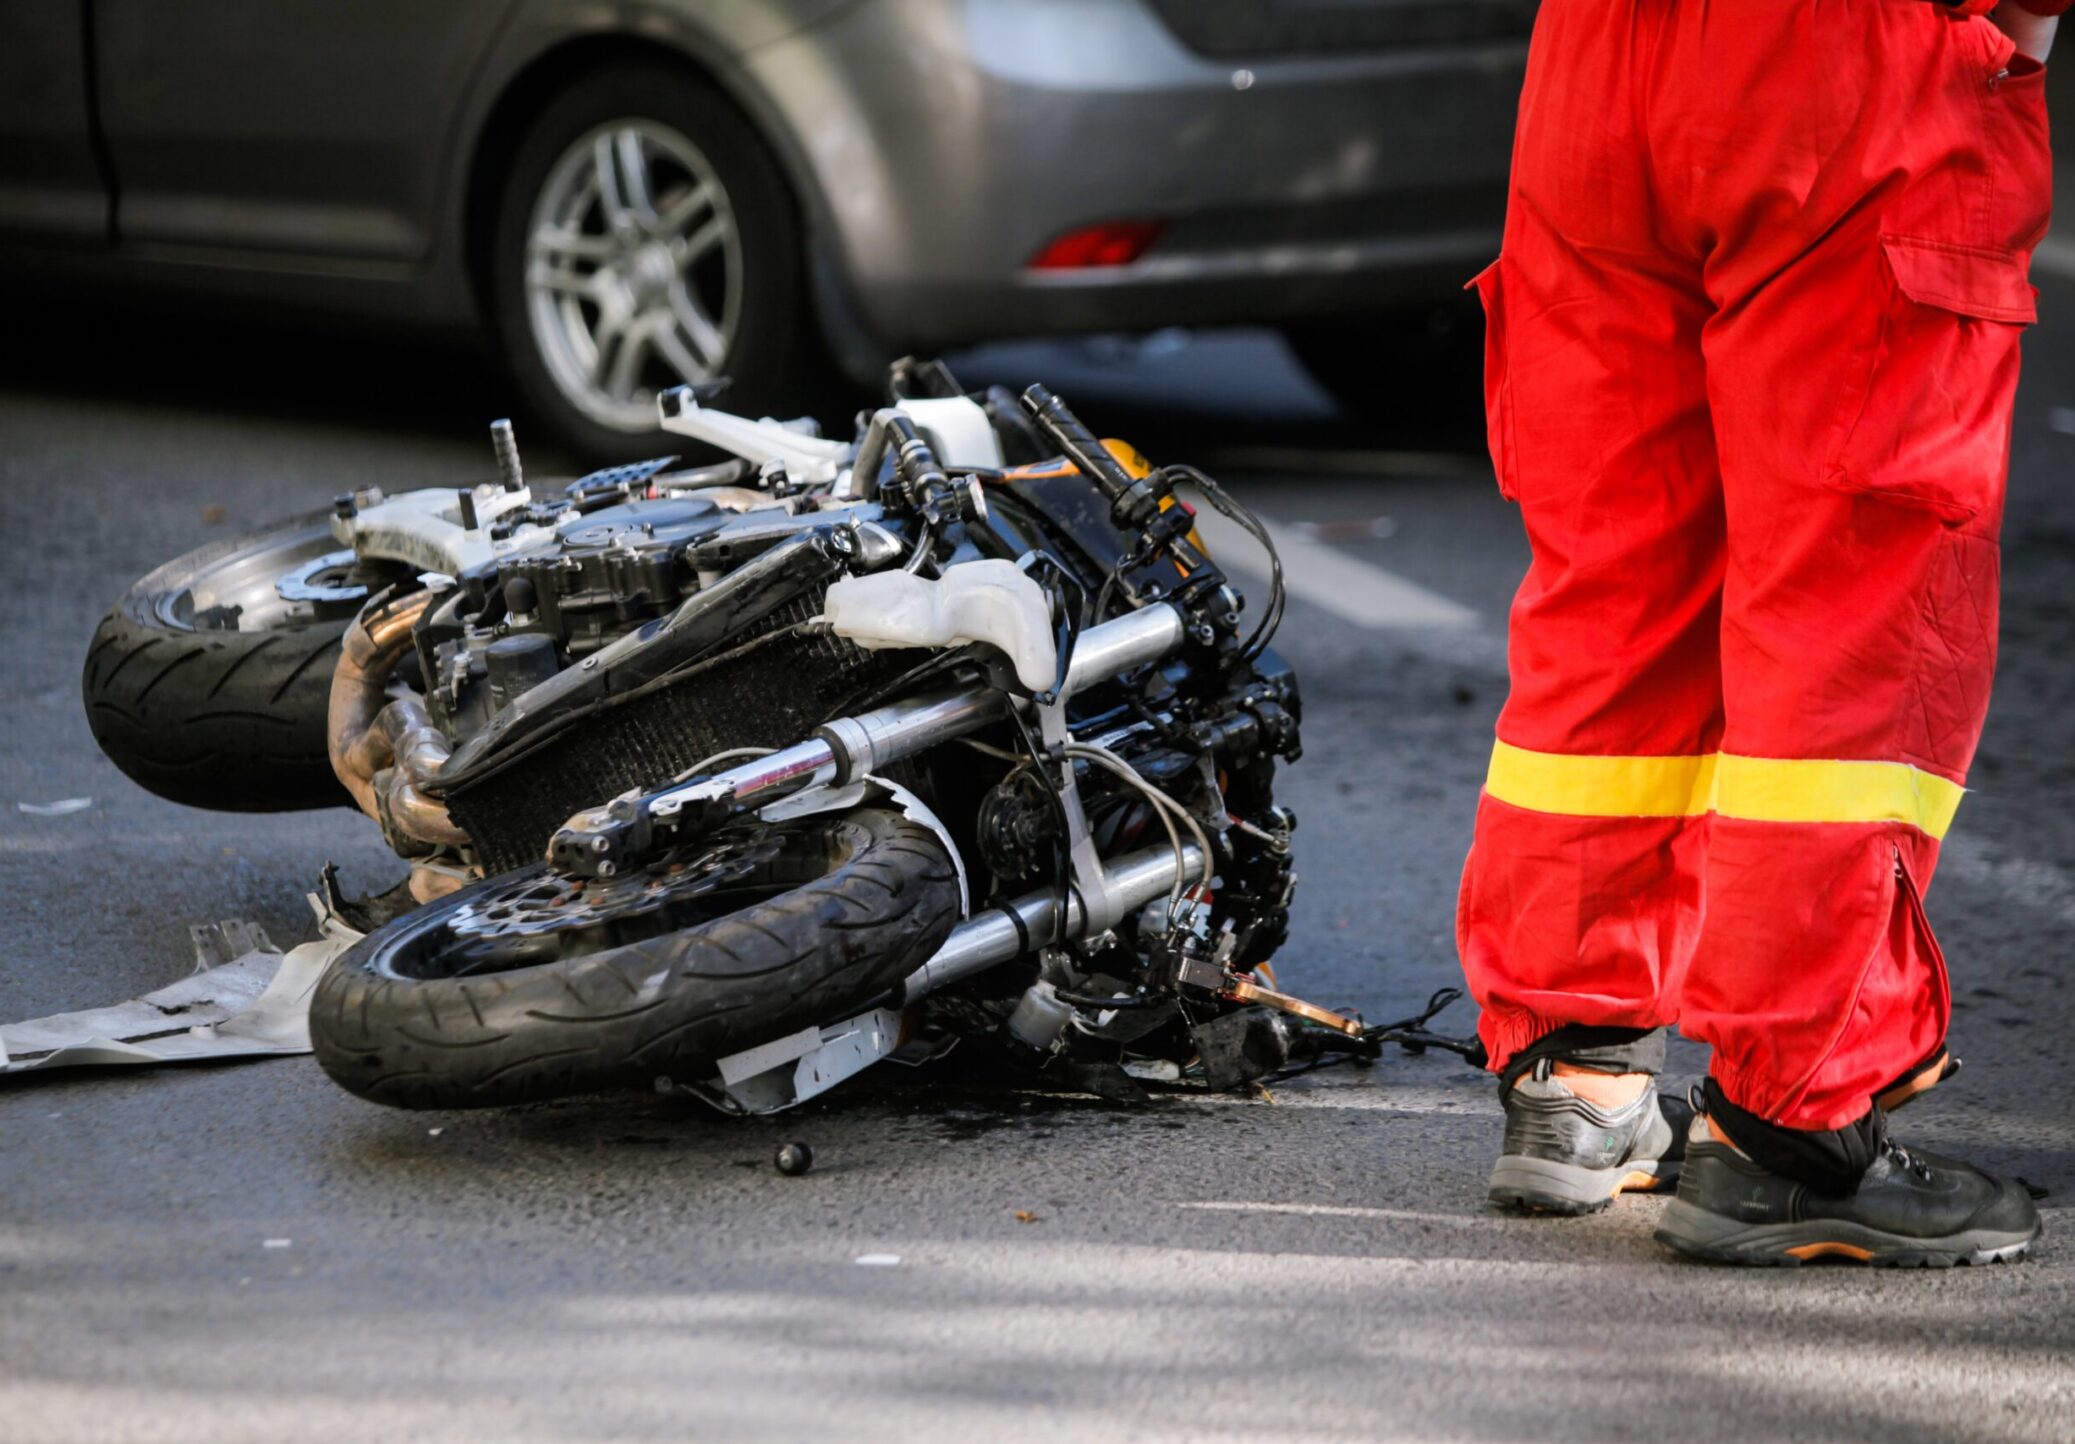 Crashed,Motorcycle,After,Road,Accident,With,A,Car,On,A